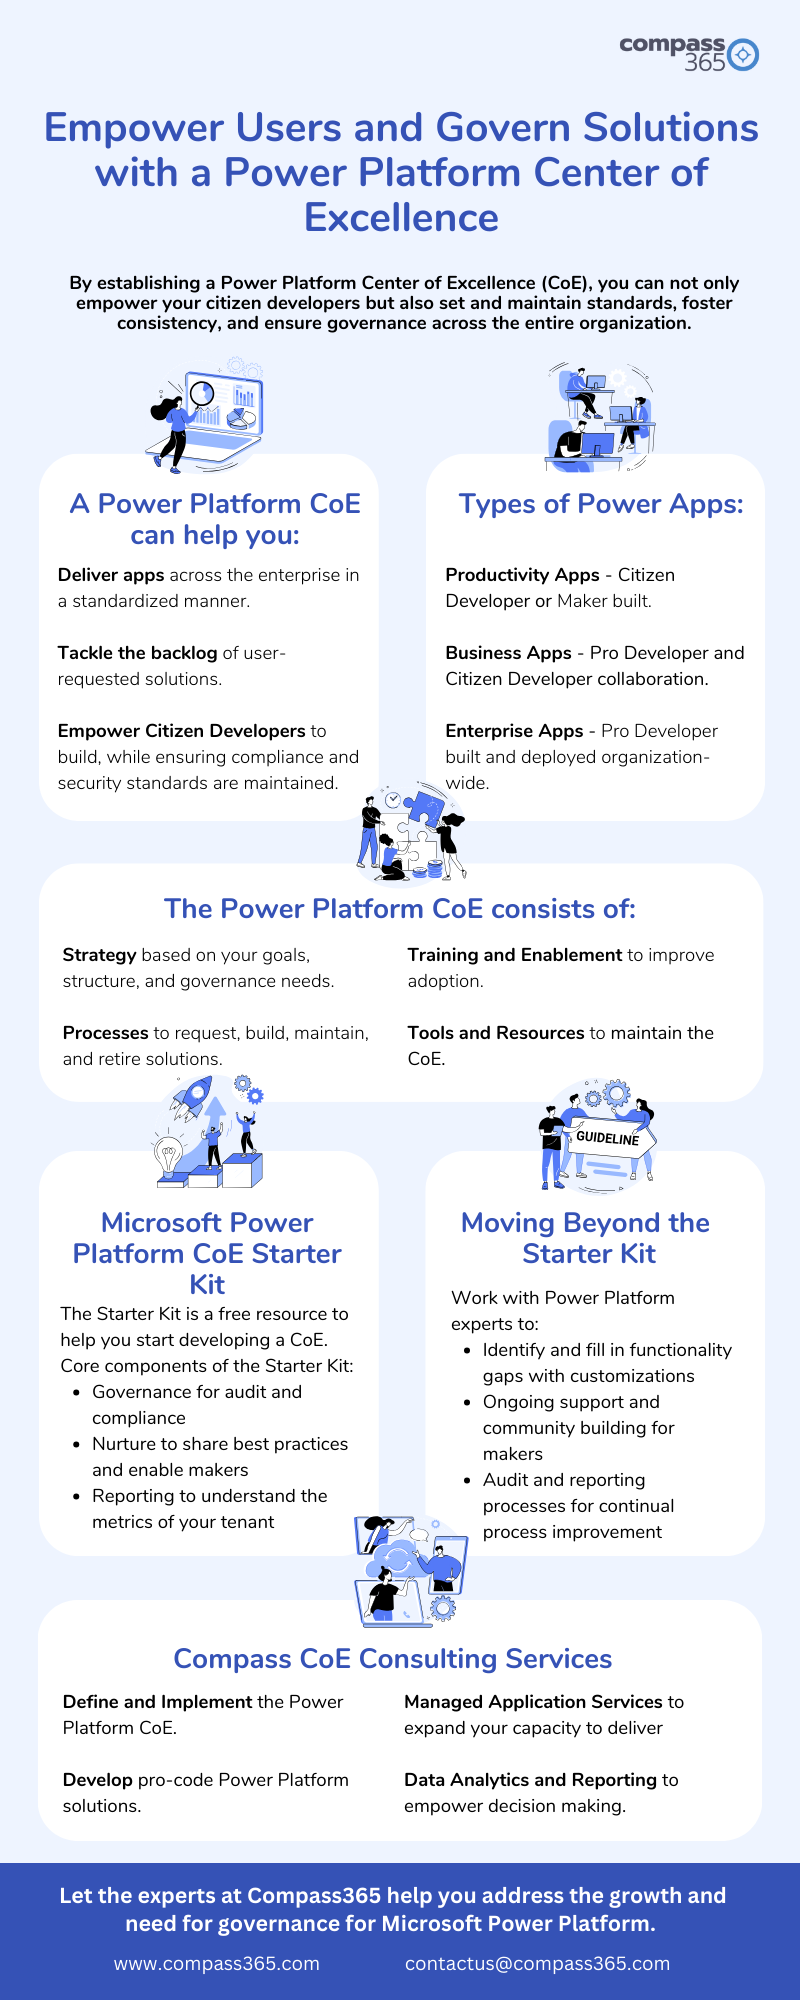 Power Platform Center of Excellence (Infographic)